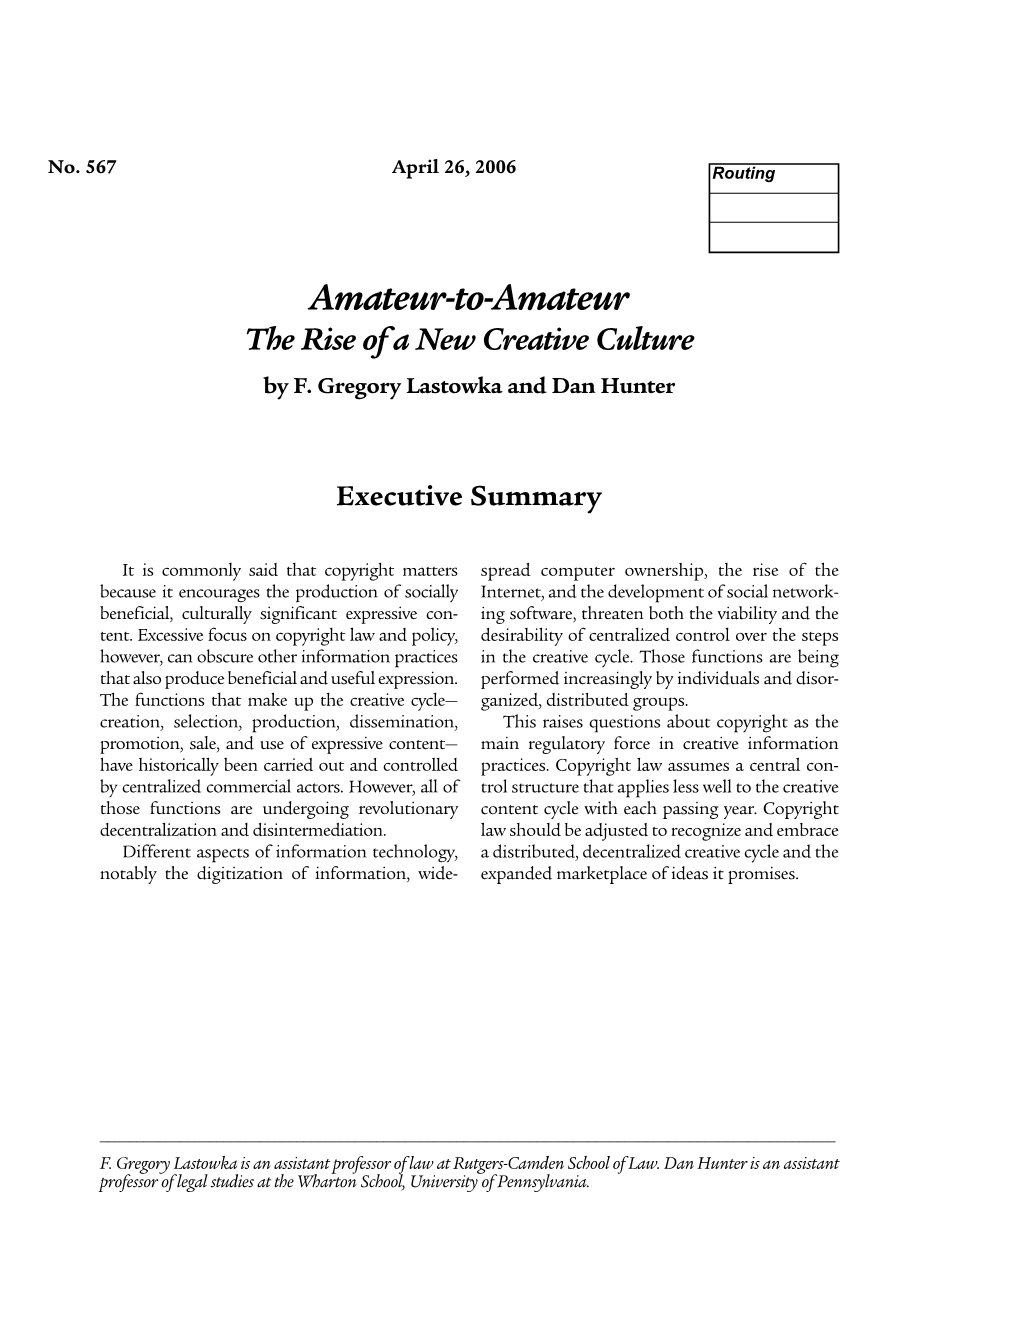 Amateur-To-Amateur the Rise of a New Creative Culture by F